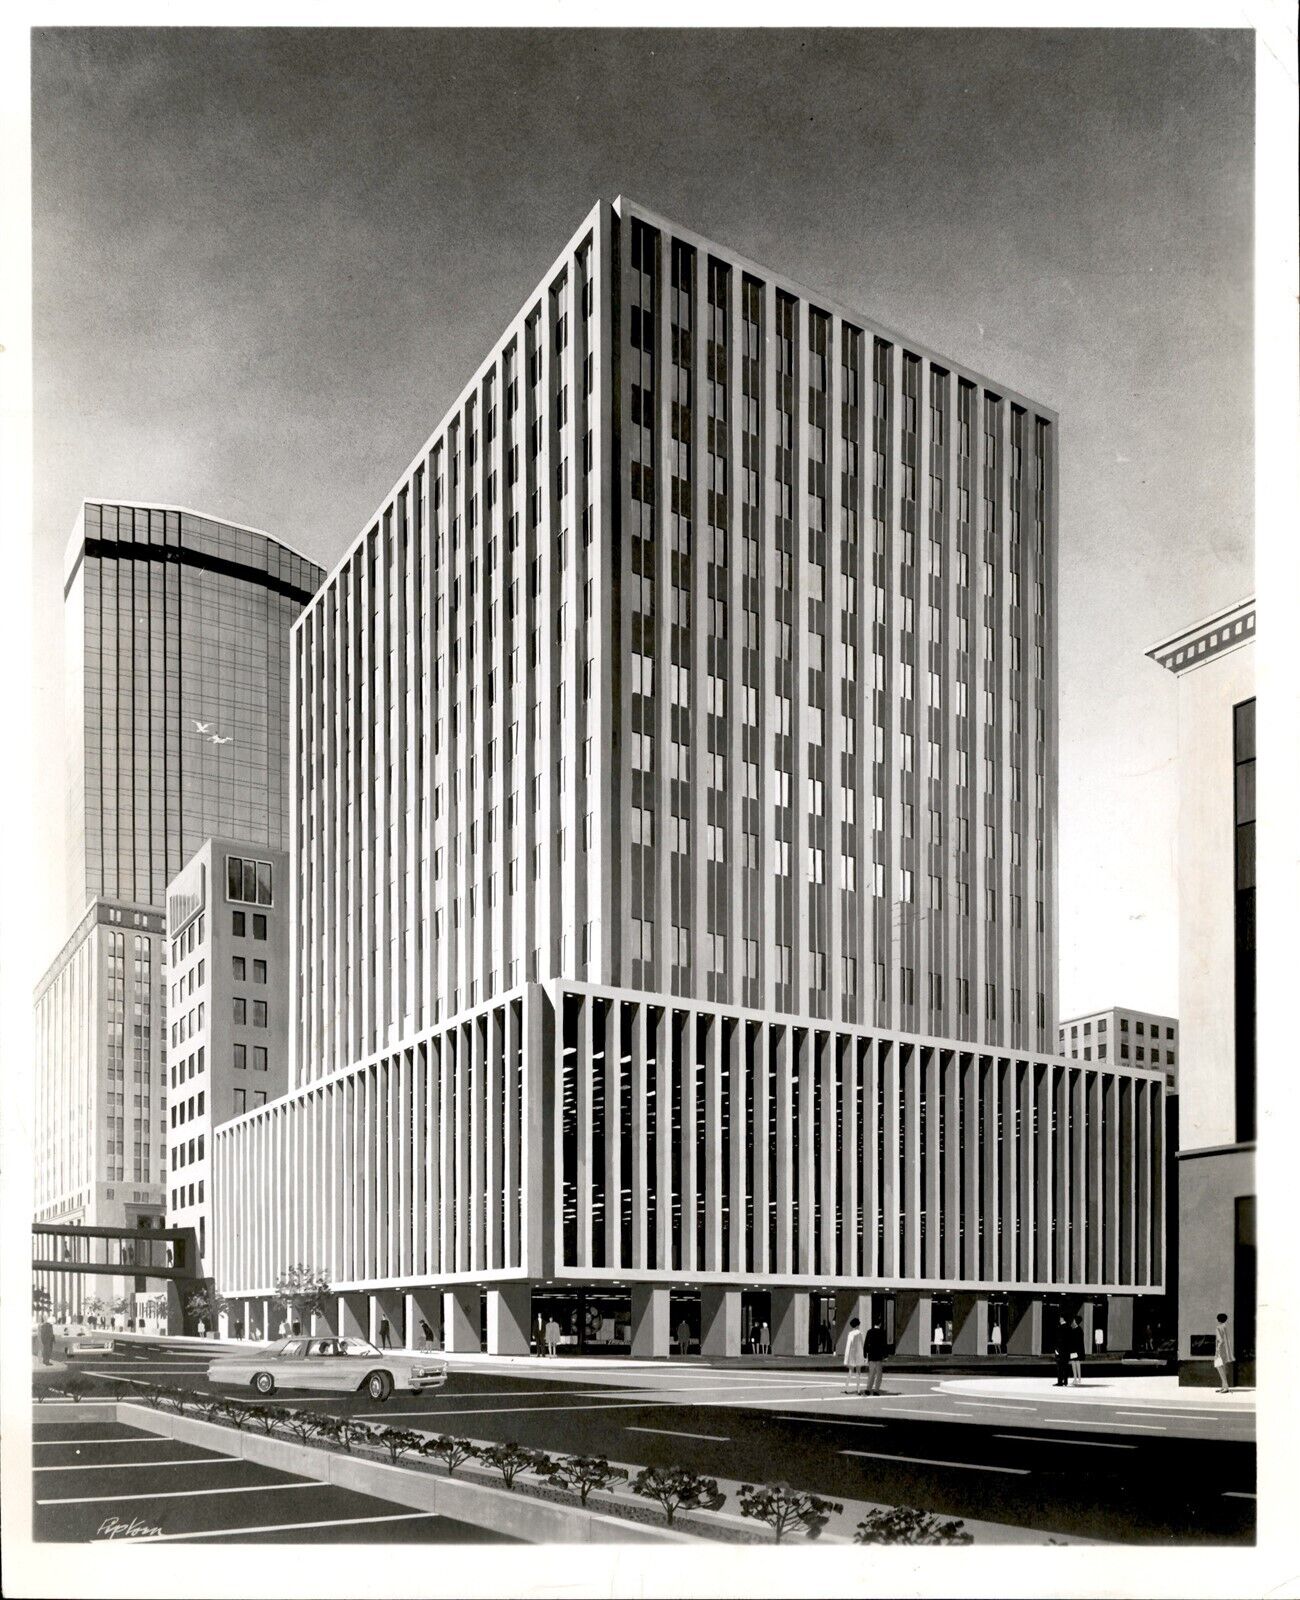 LD306 1972 Original Photo THE FEDERAL RESERVE BANK BUILDING IN MINNEAPOLIS MN